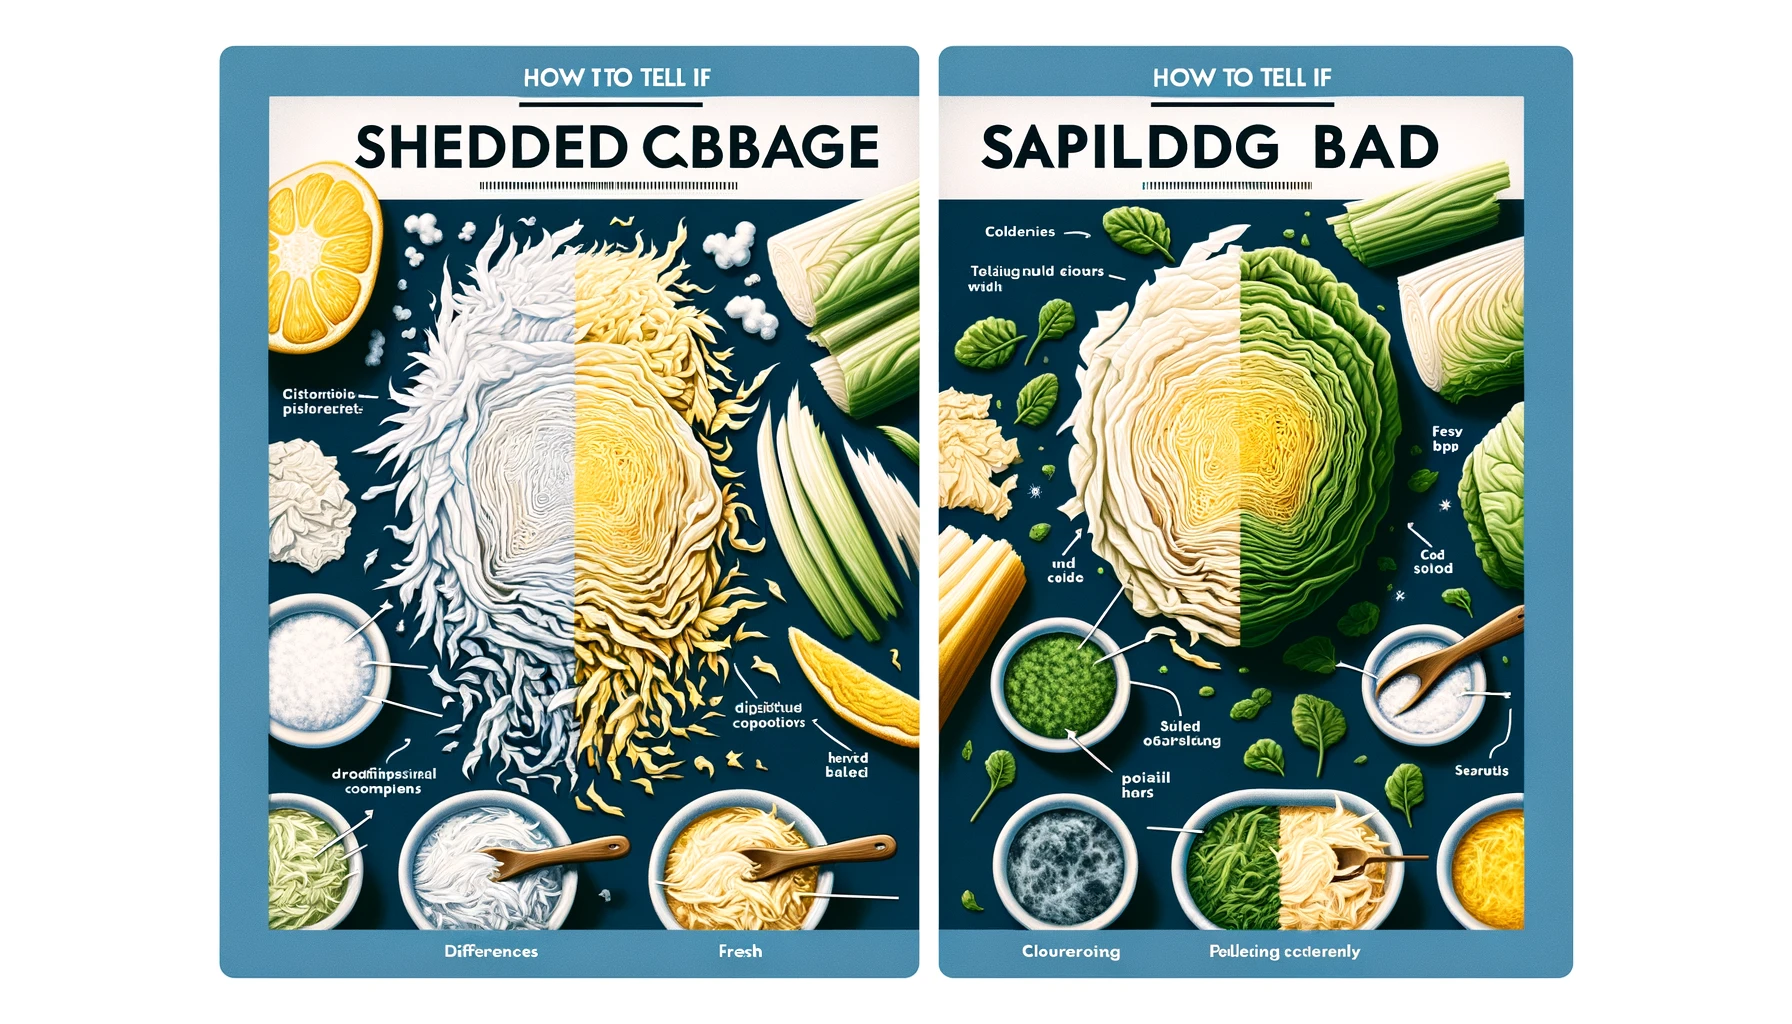 How to Tell If Shredded Cabbage is Bad